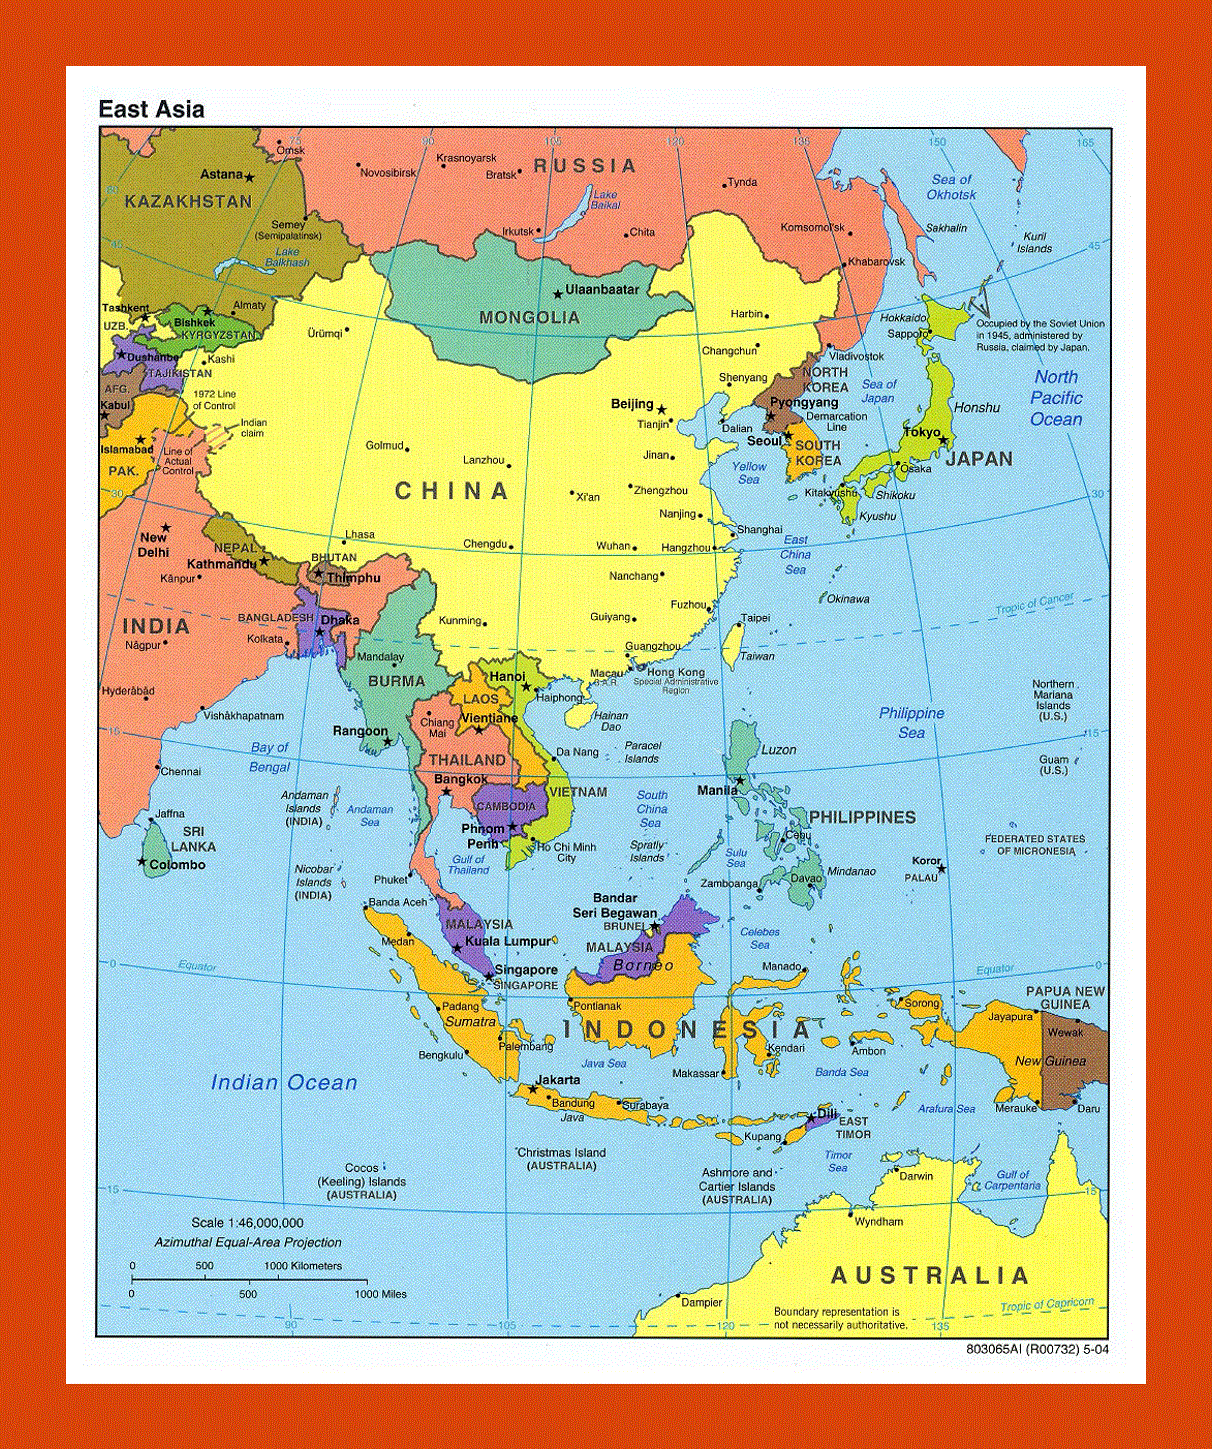 Political map of East Asia - 2004